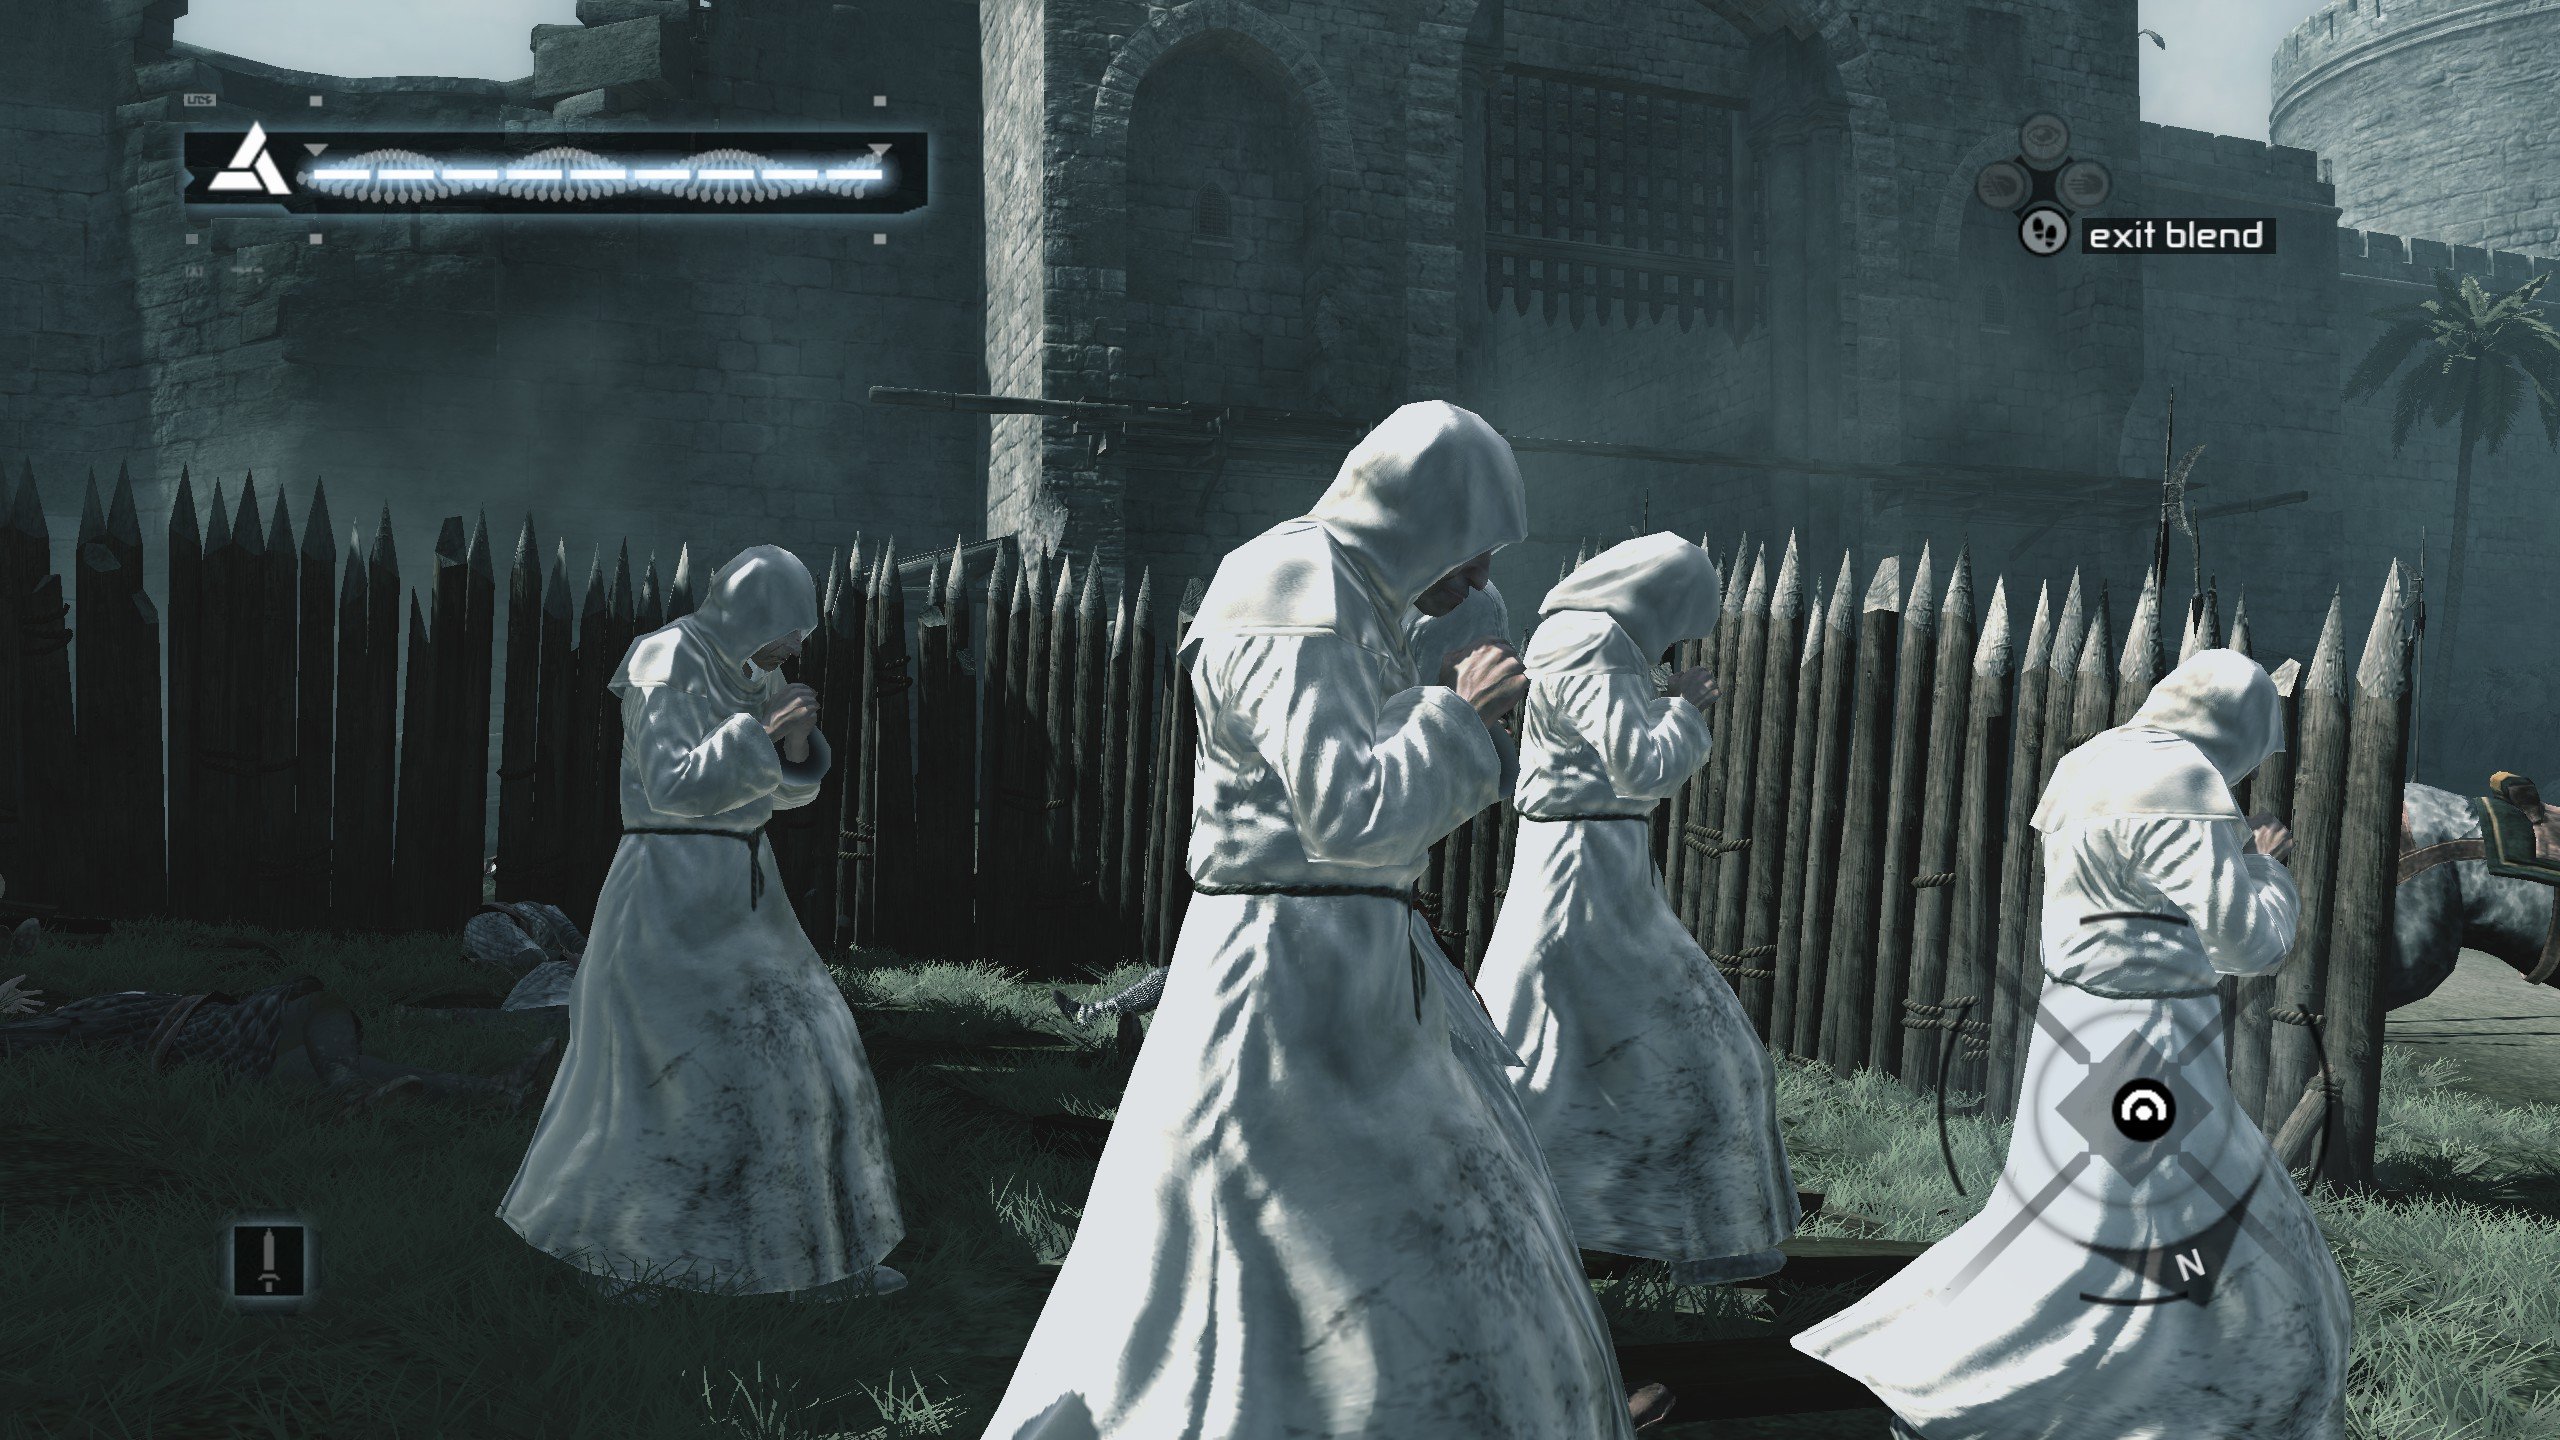 The player mixes with the priests in the original Assassin's Creed.